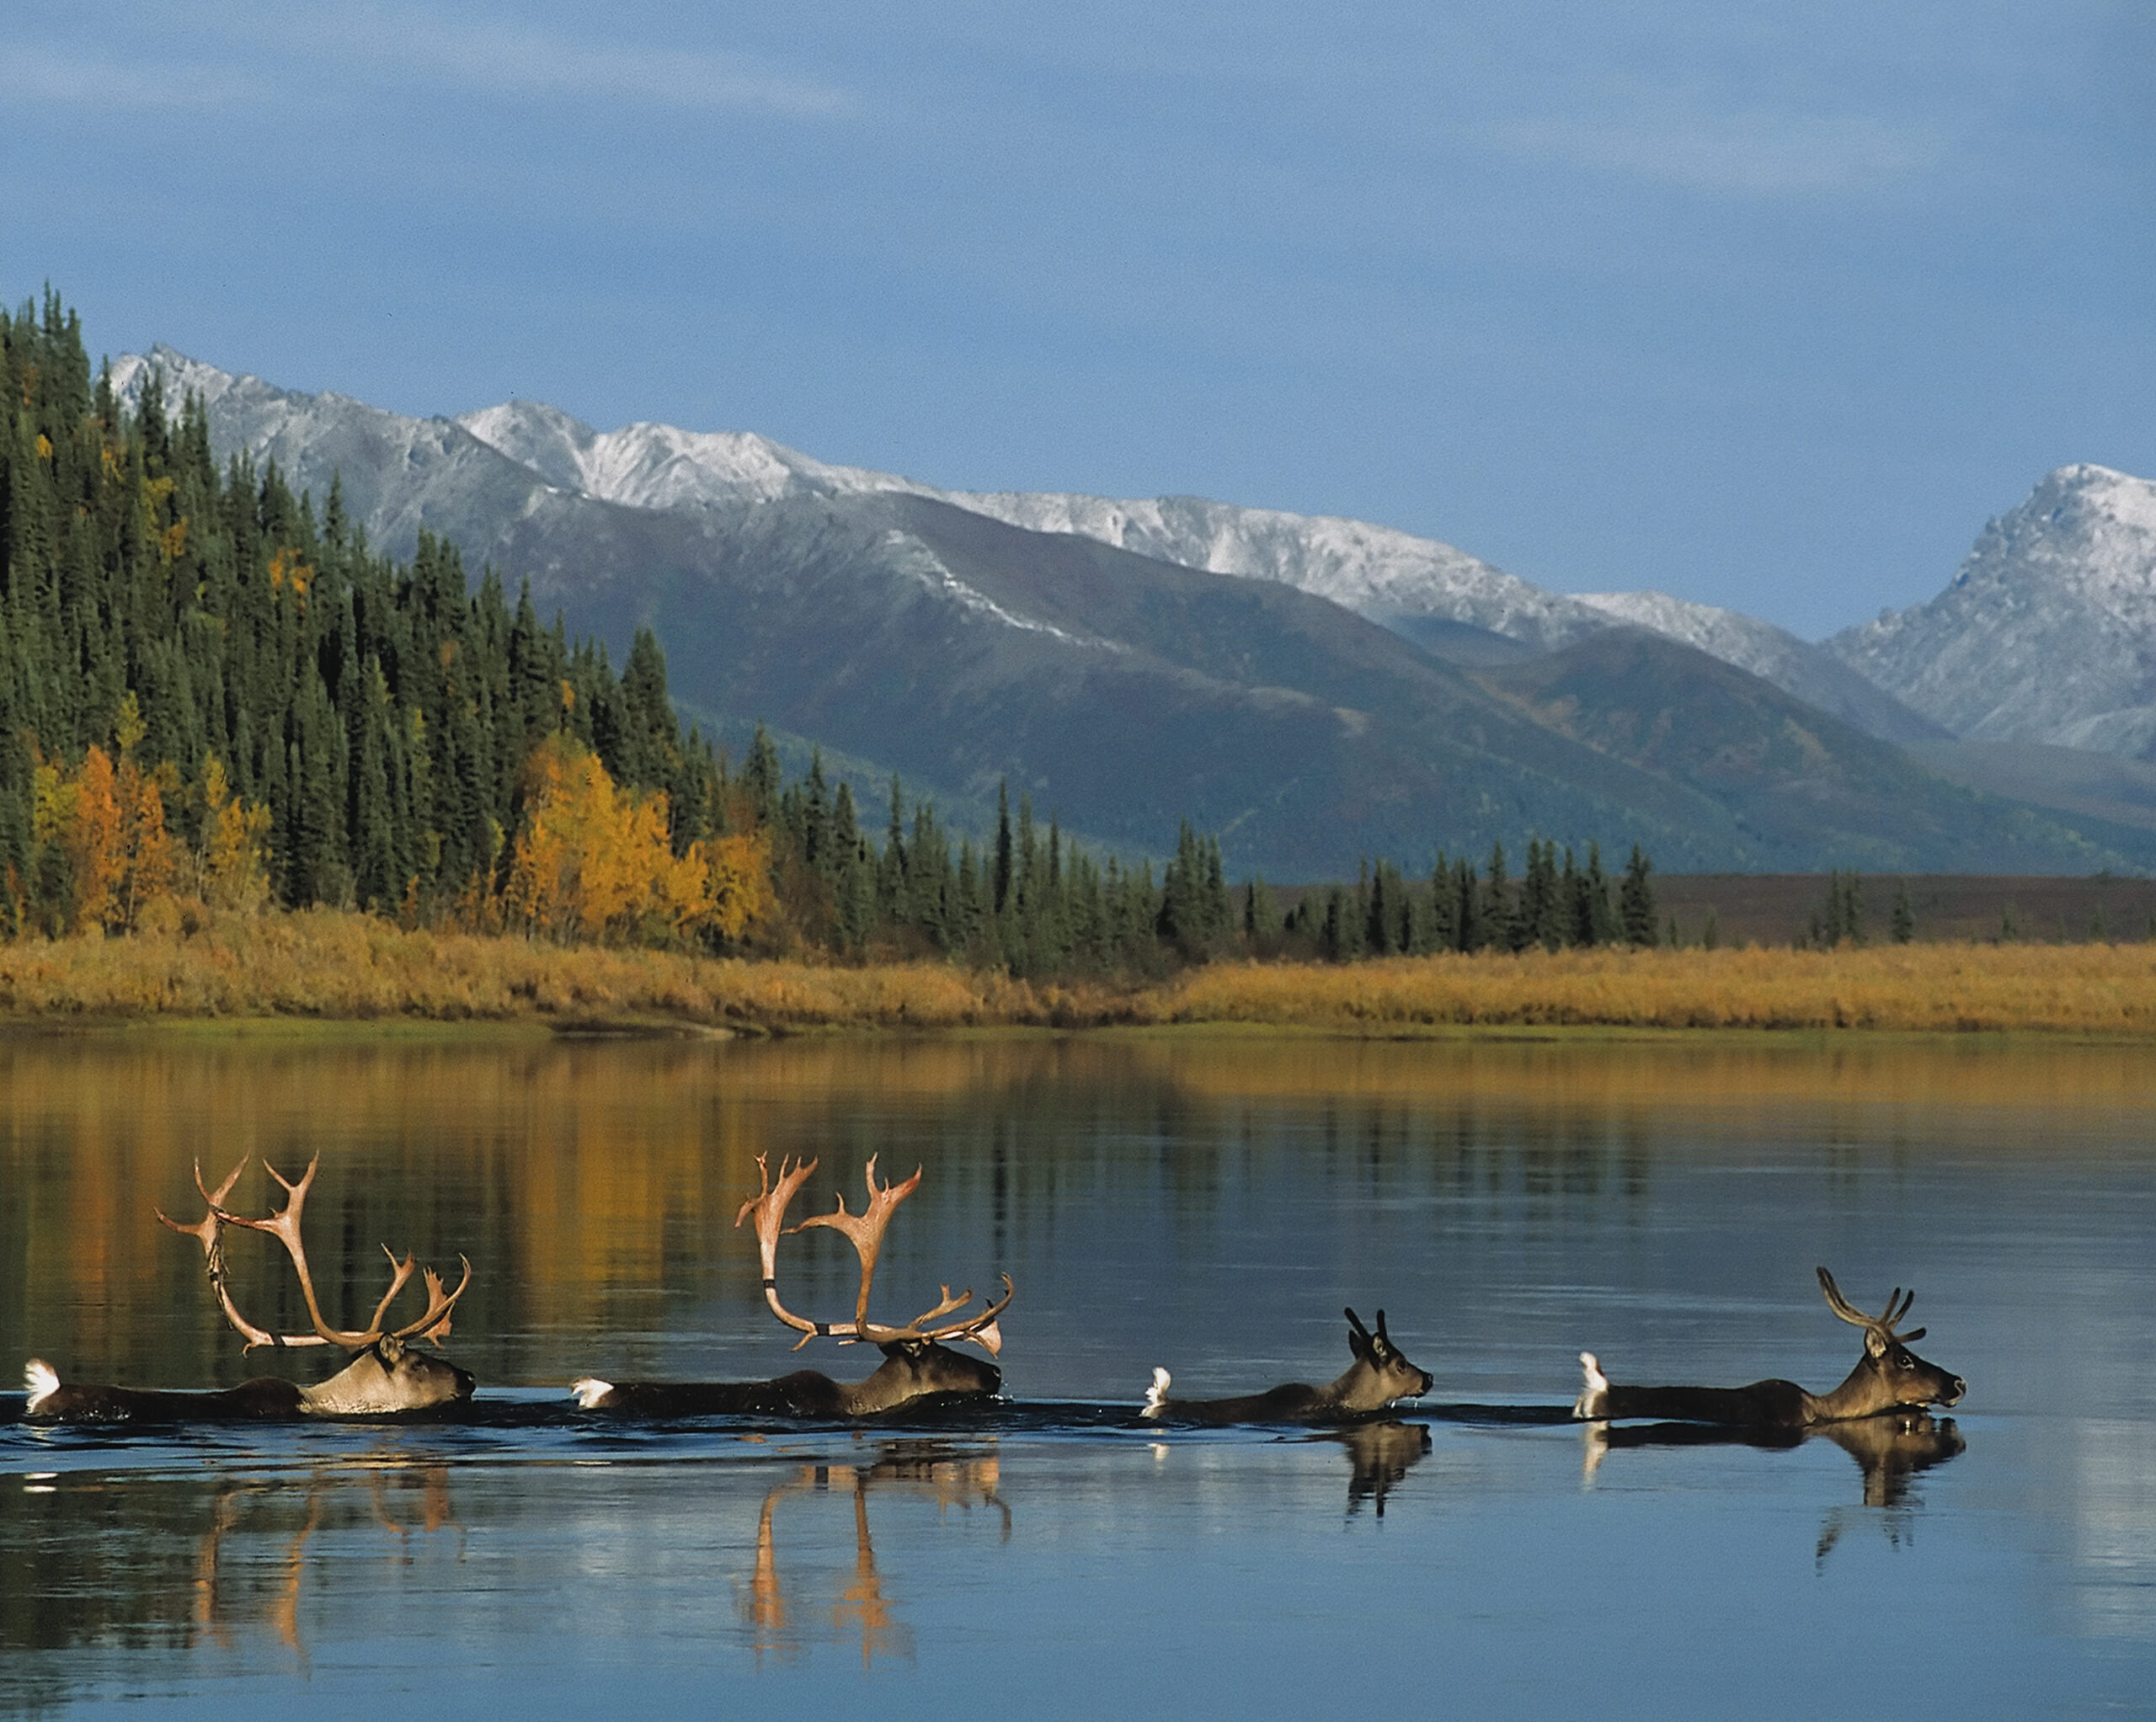 Four caribou swim across a calm river with yellow grasses, trees and mountains in the background.